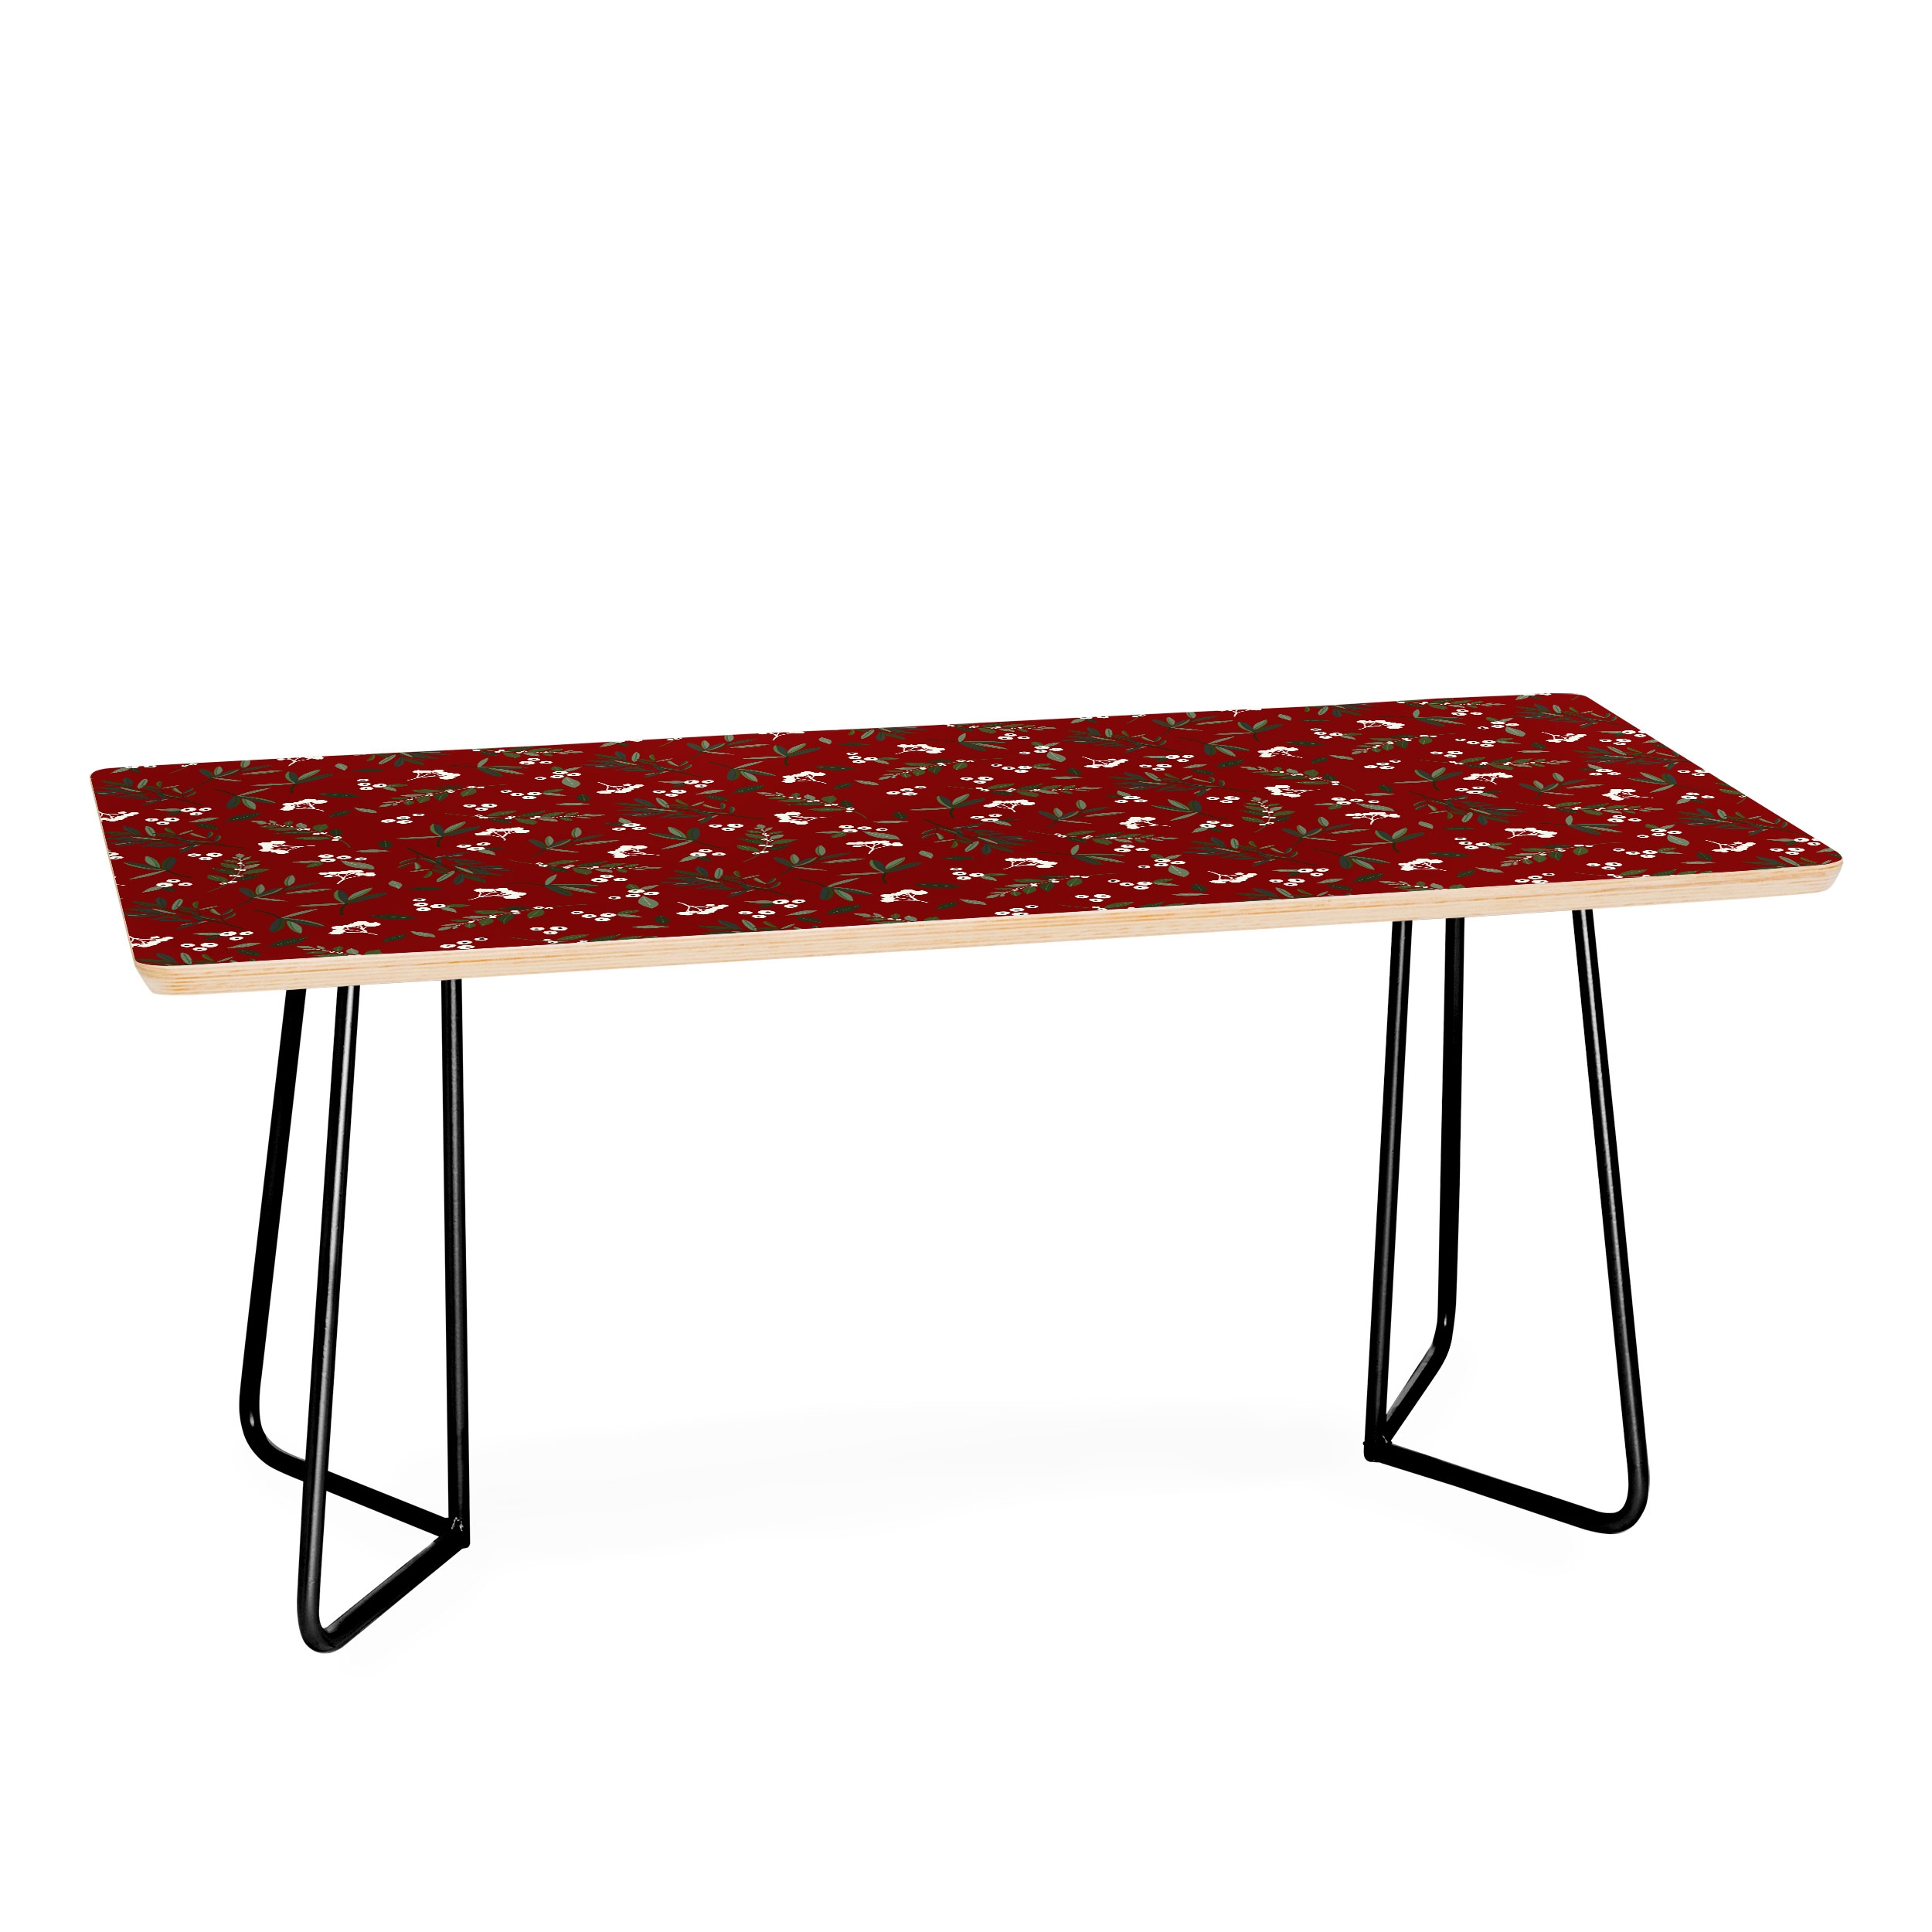 Nordic Olive Red by Iveta Abolina - Coffee Table Black Aston Legs - Image 1